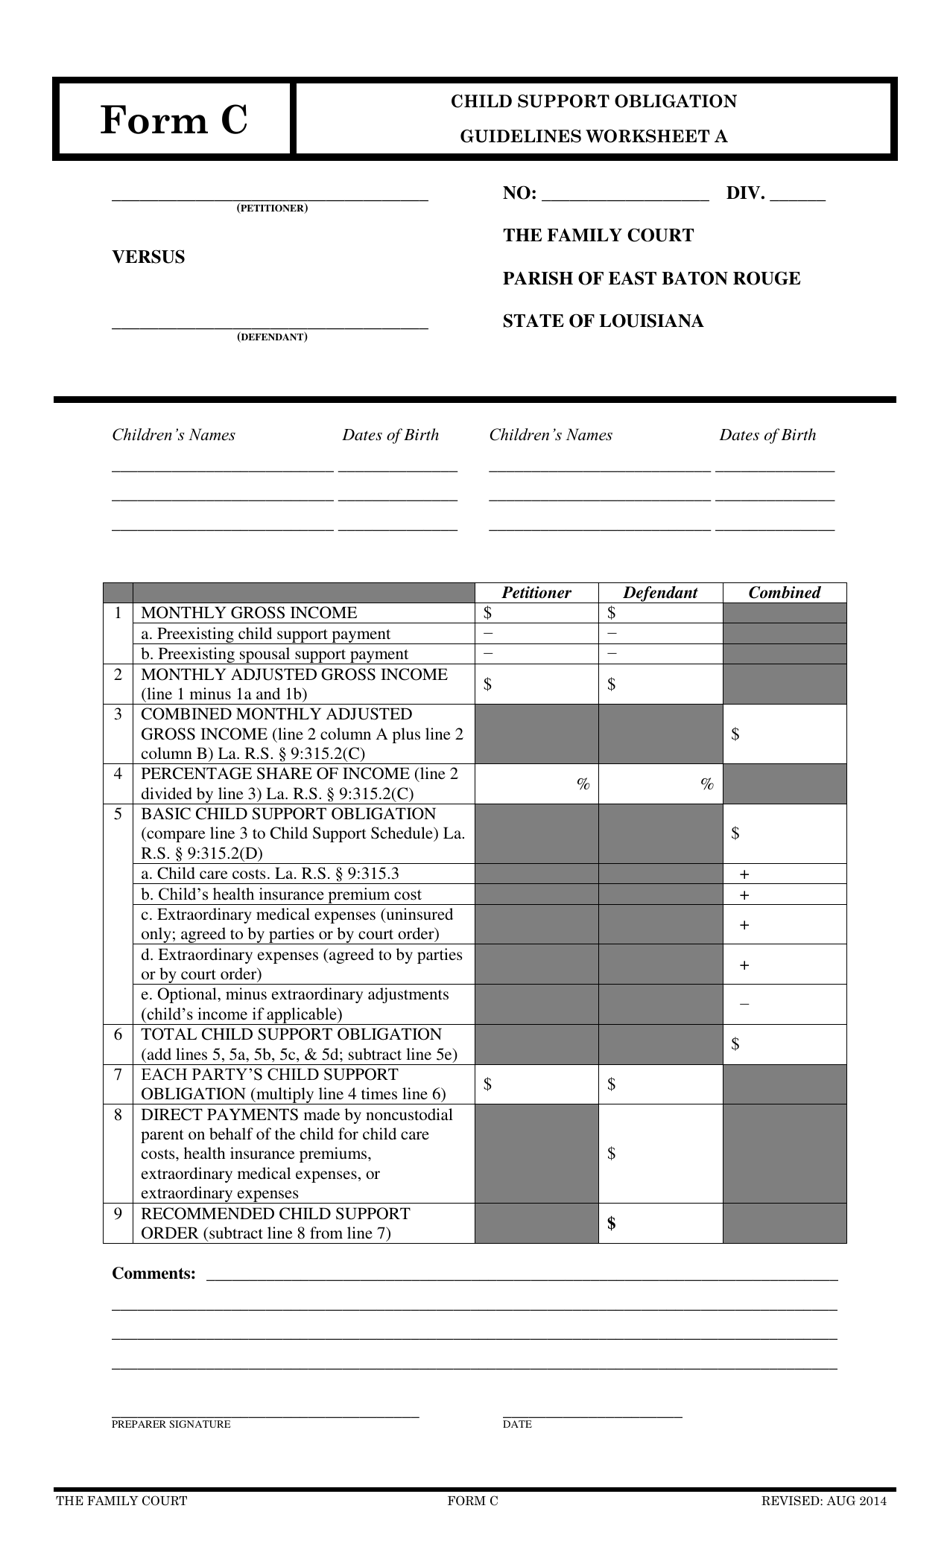 Form C Worksheet A Child Support Obligation Guidelines - East Baton Rouge Parish, Louisiana, Page 1